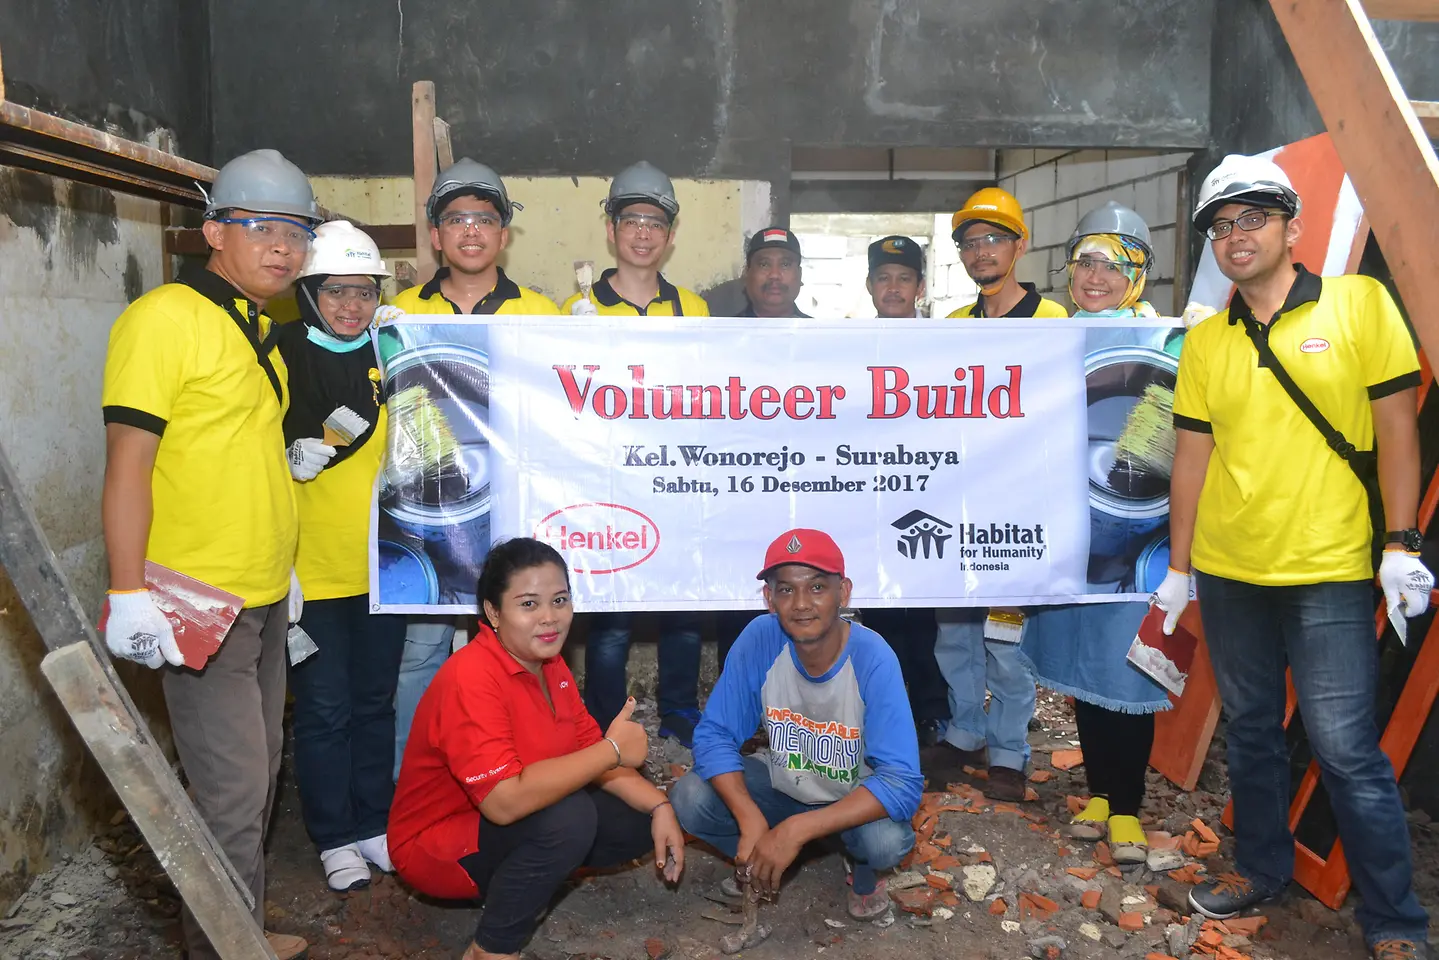  Group photo of Henkel Indonesia's employees after working on a project initiated by Habitat for Humanity Indonesia. They helped to build two houses and 13 septic tanks for the people of Tegalsari sub-district in Surabaya. 